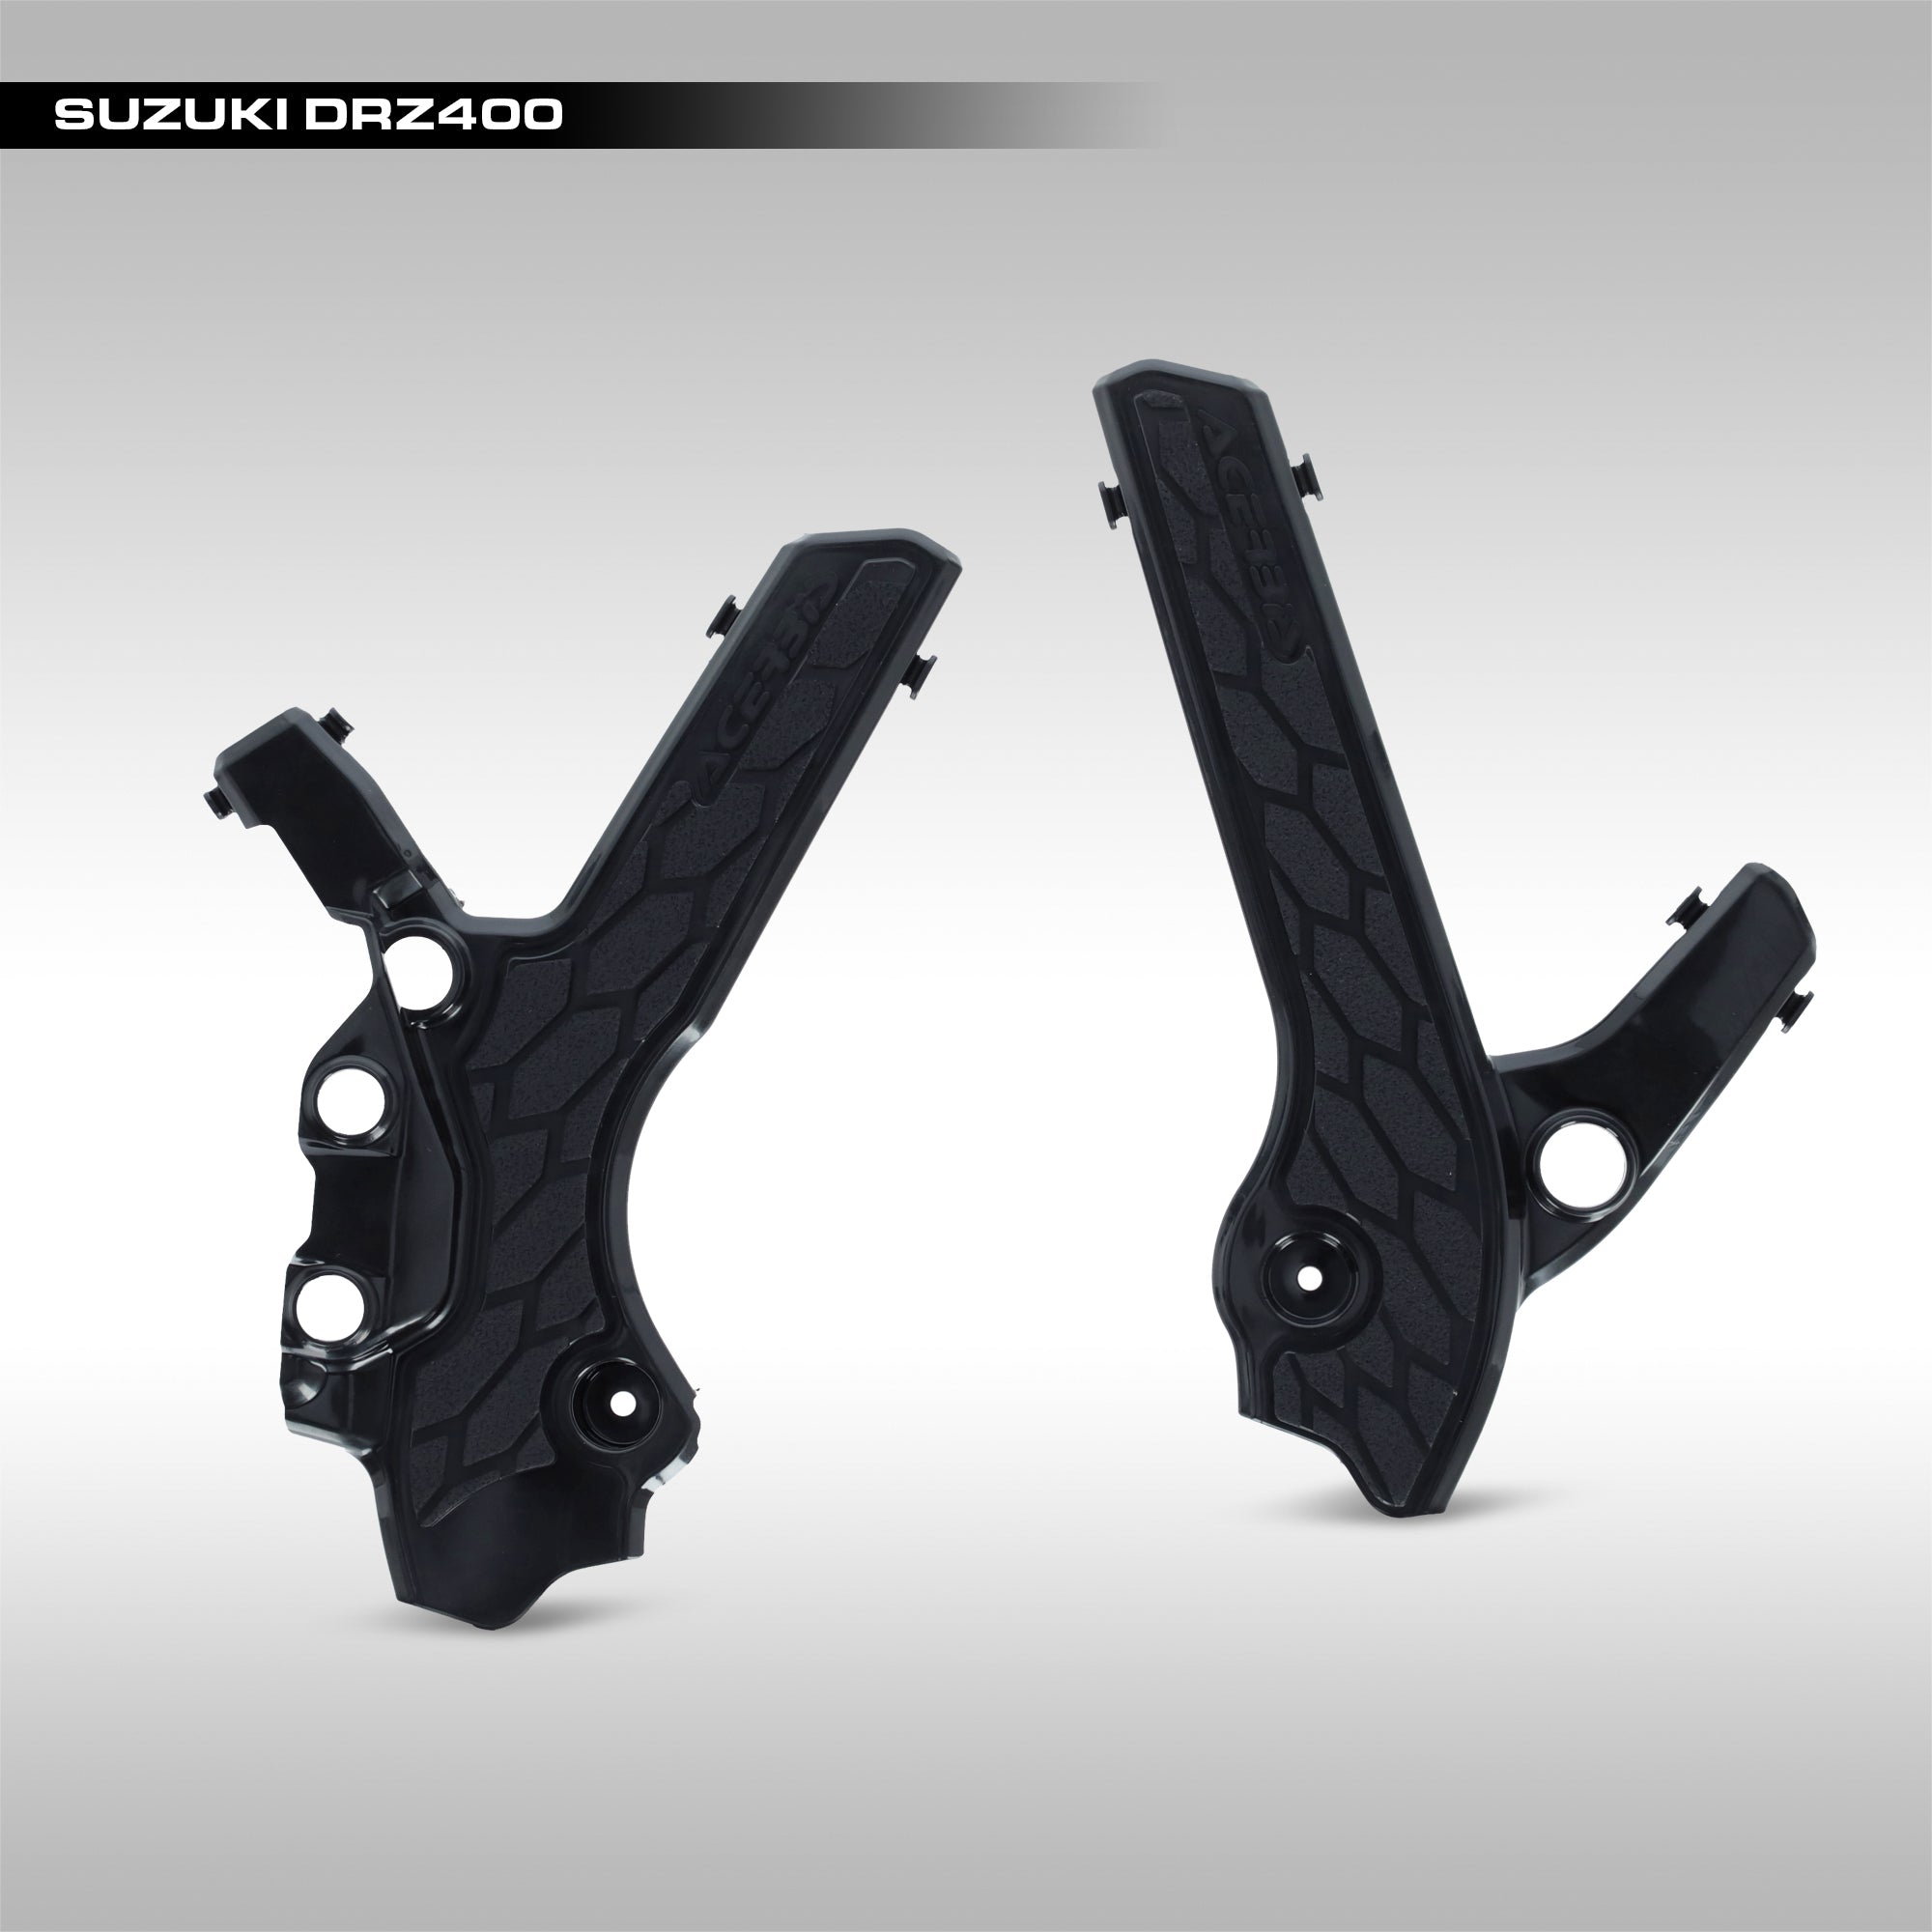 Acerbis Black X-Grip protectors For Suzuki DRZ400 help protect your frame. These frame guards protect your bike from scratching paint.